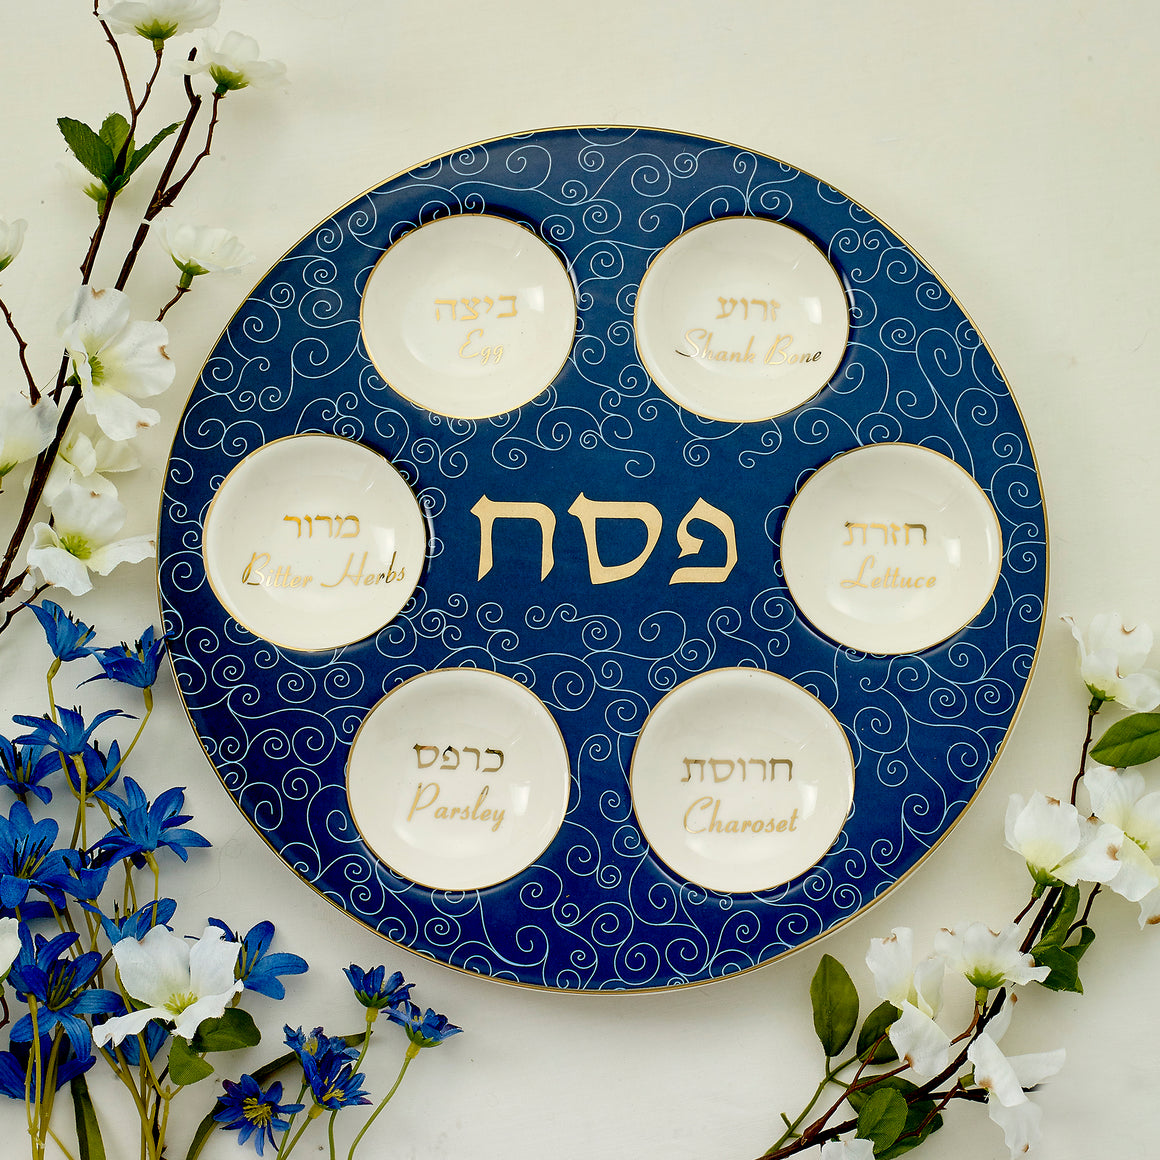 PLATES LARGE - PASSOVER SEDER PORCELAIN WITH GOLD ACCENTS